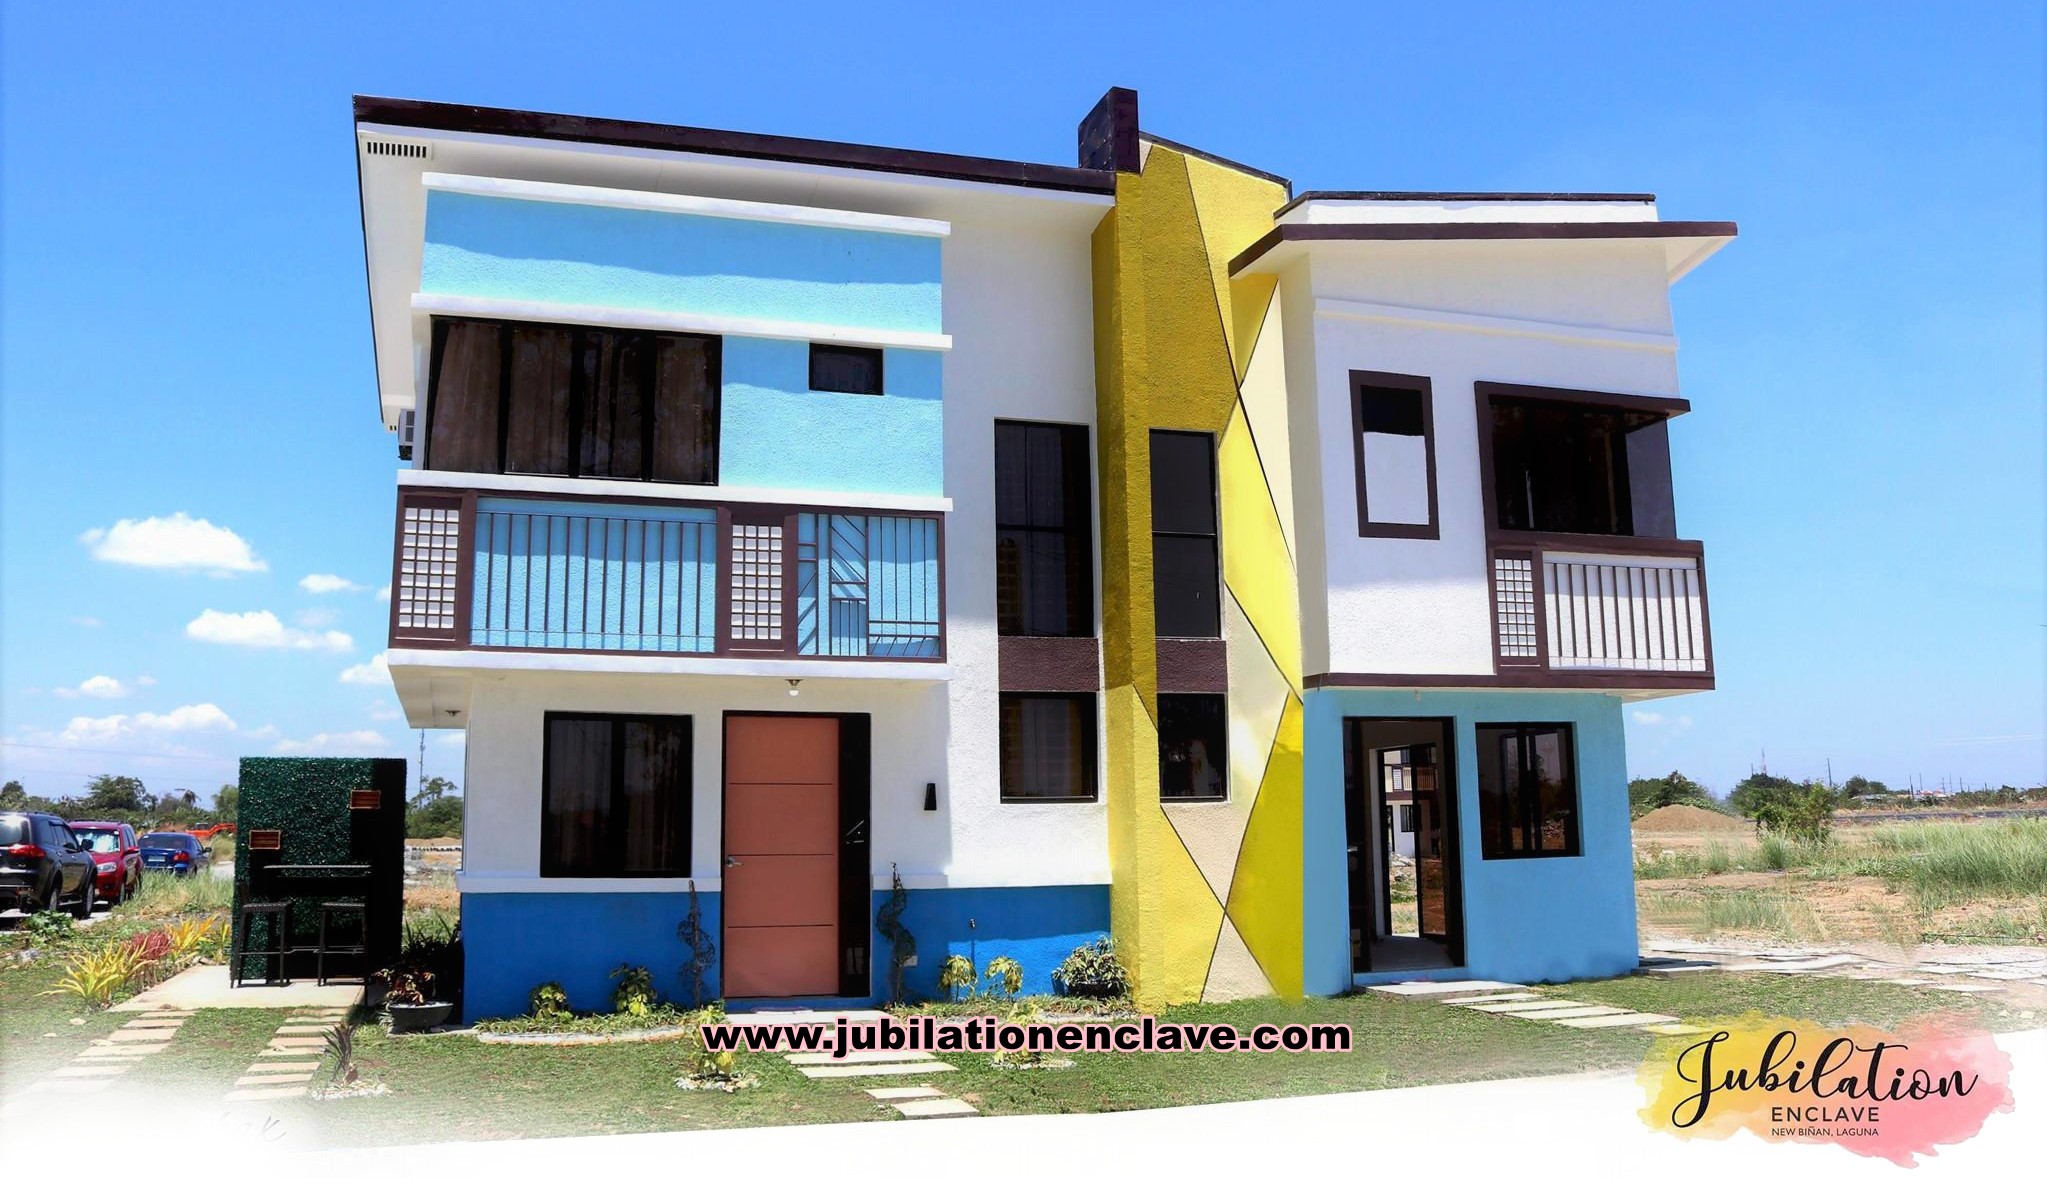 House for Sale in Jubilation Enclave